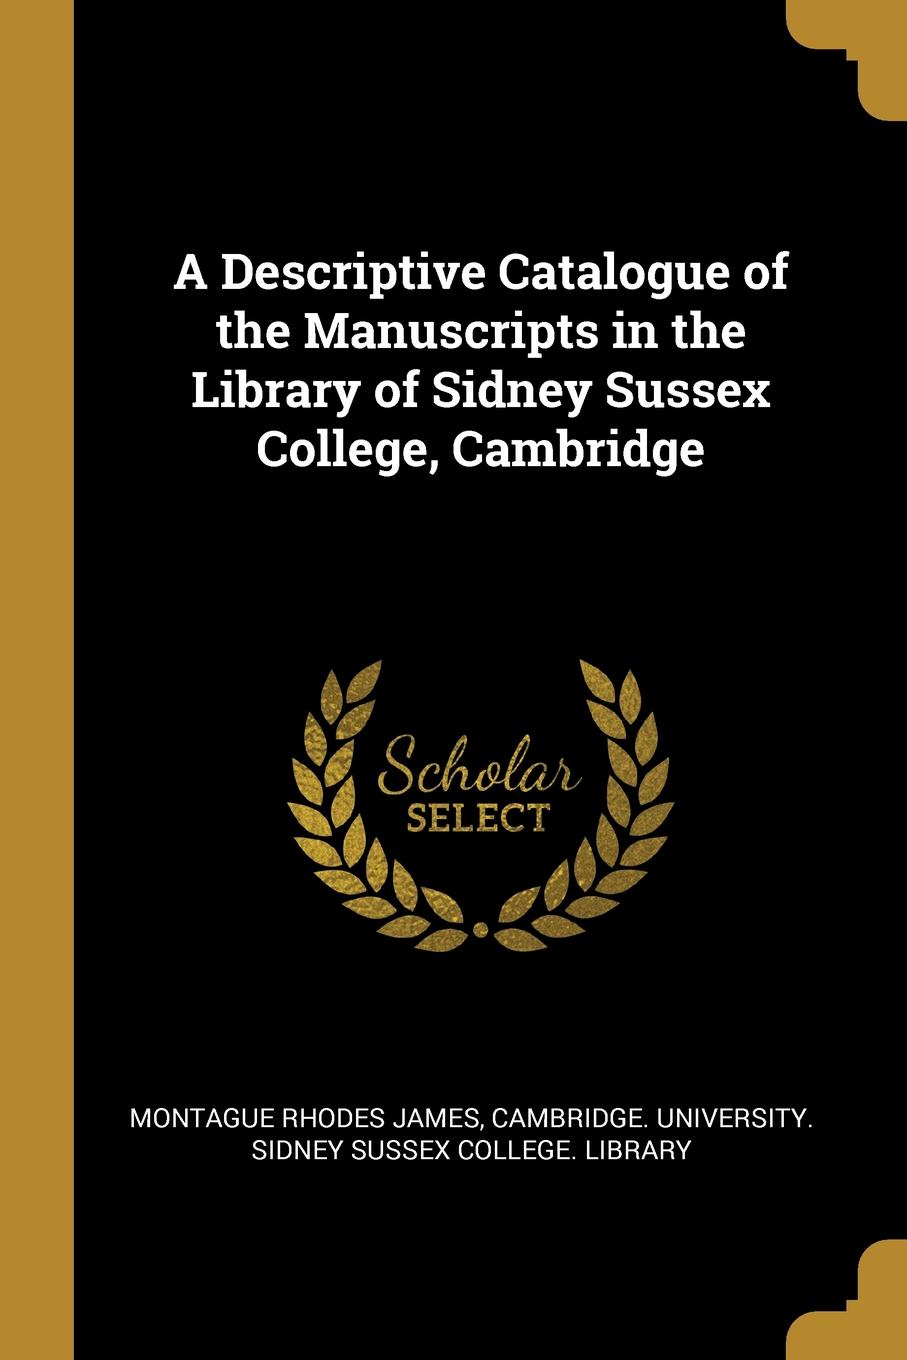 A Descriptive Catalogue of the Manuscripts in the Library of Sidney Sussex College, Cambridge